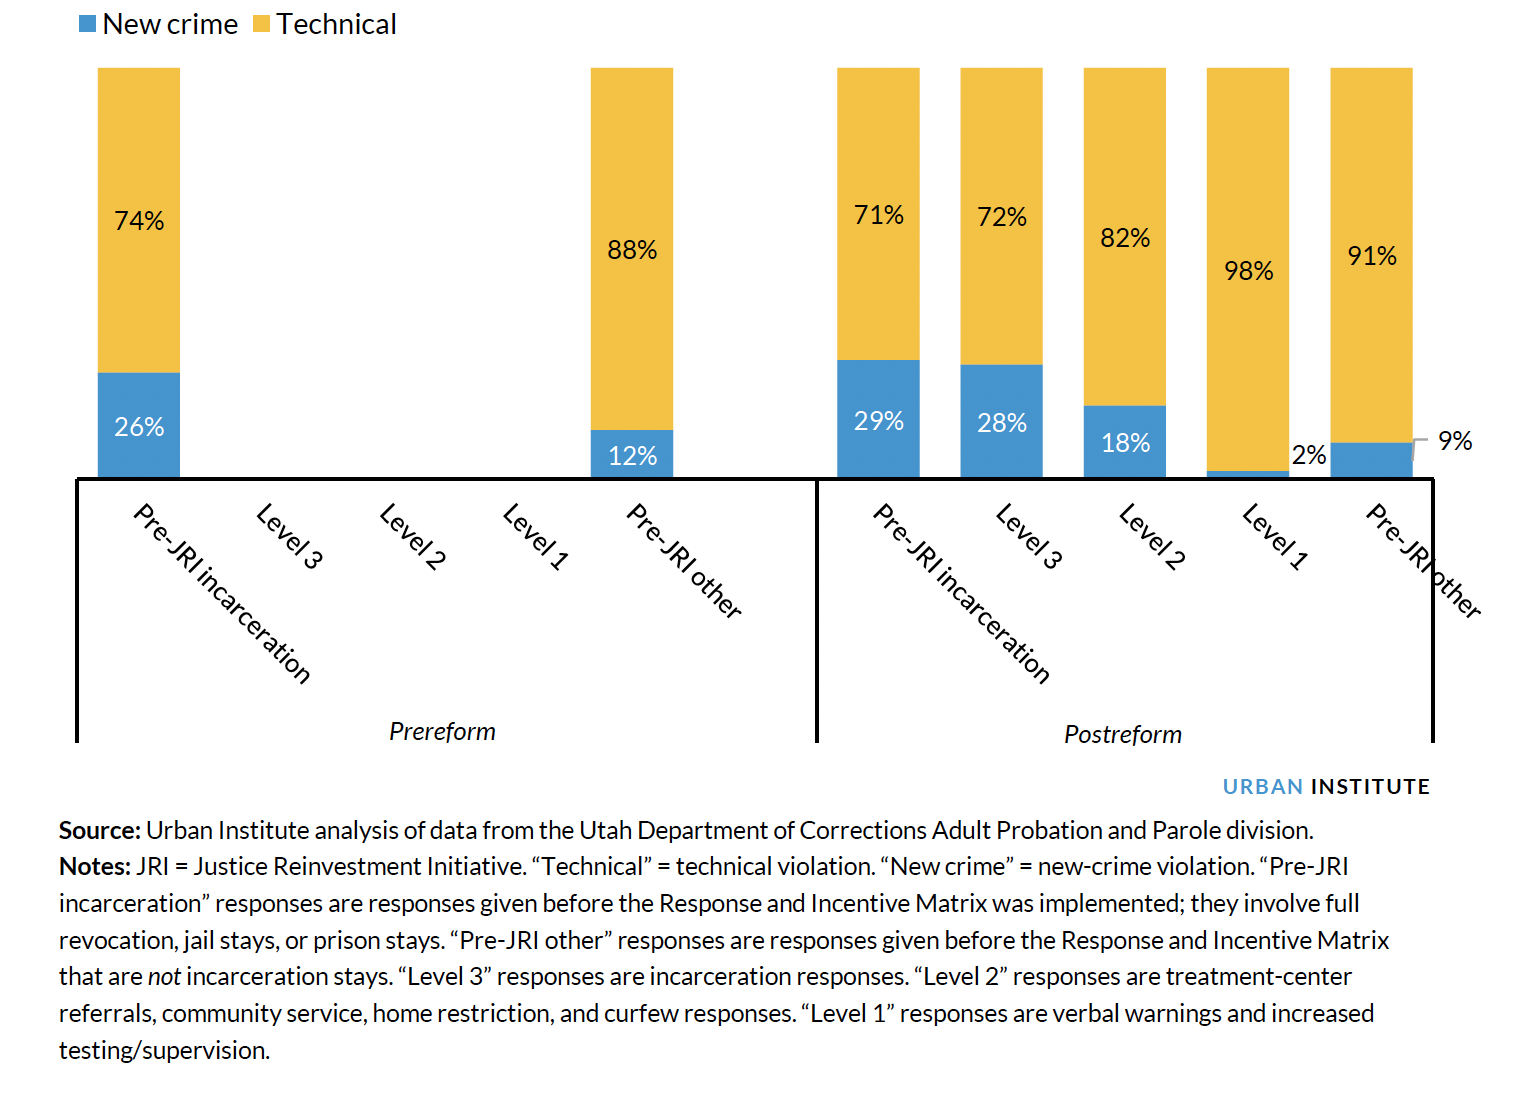 Illustrating Most Serious Violation Associated with a Violation Response among the Probation Population before and after Utah’s Community Supervision Reforms, 2010–19 